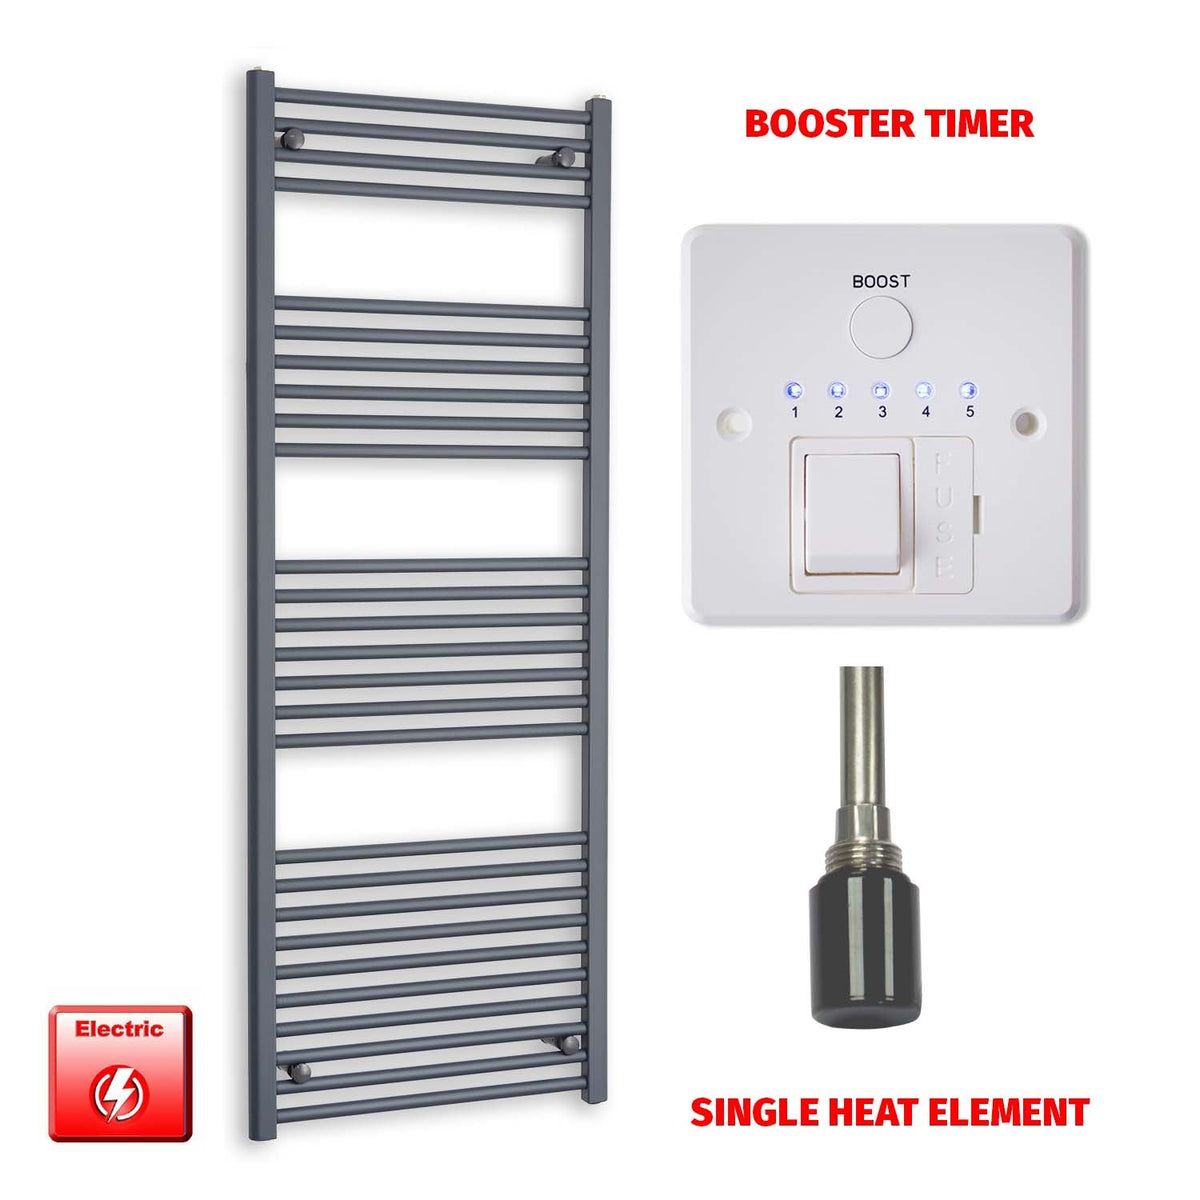 1600mm High 600mm Wide Flat Anthracite Pre-Filled Electric Heated Towel Rail Radiator HTR Single heat element Booster timer